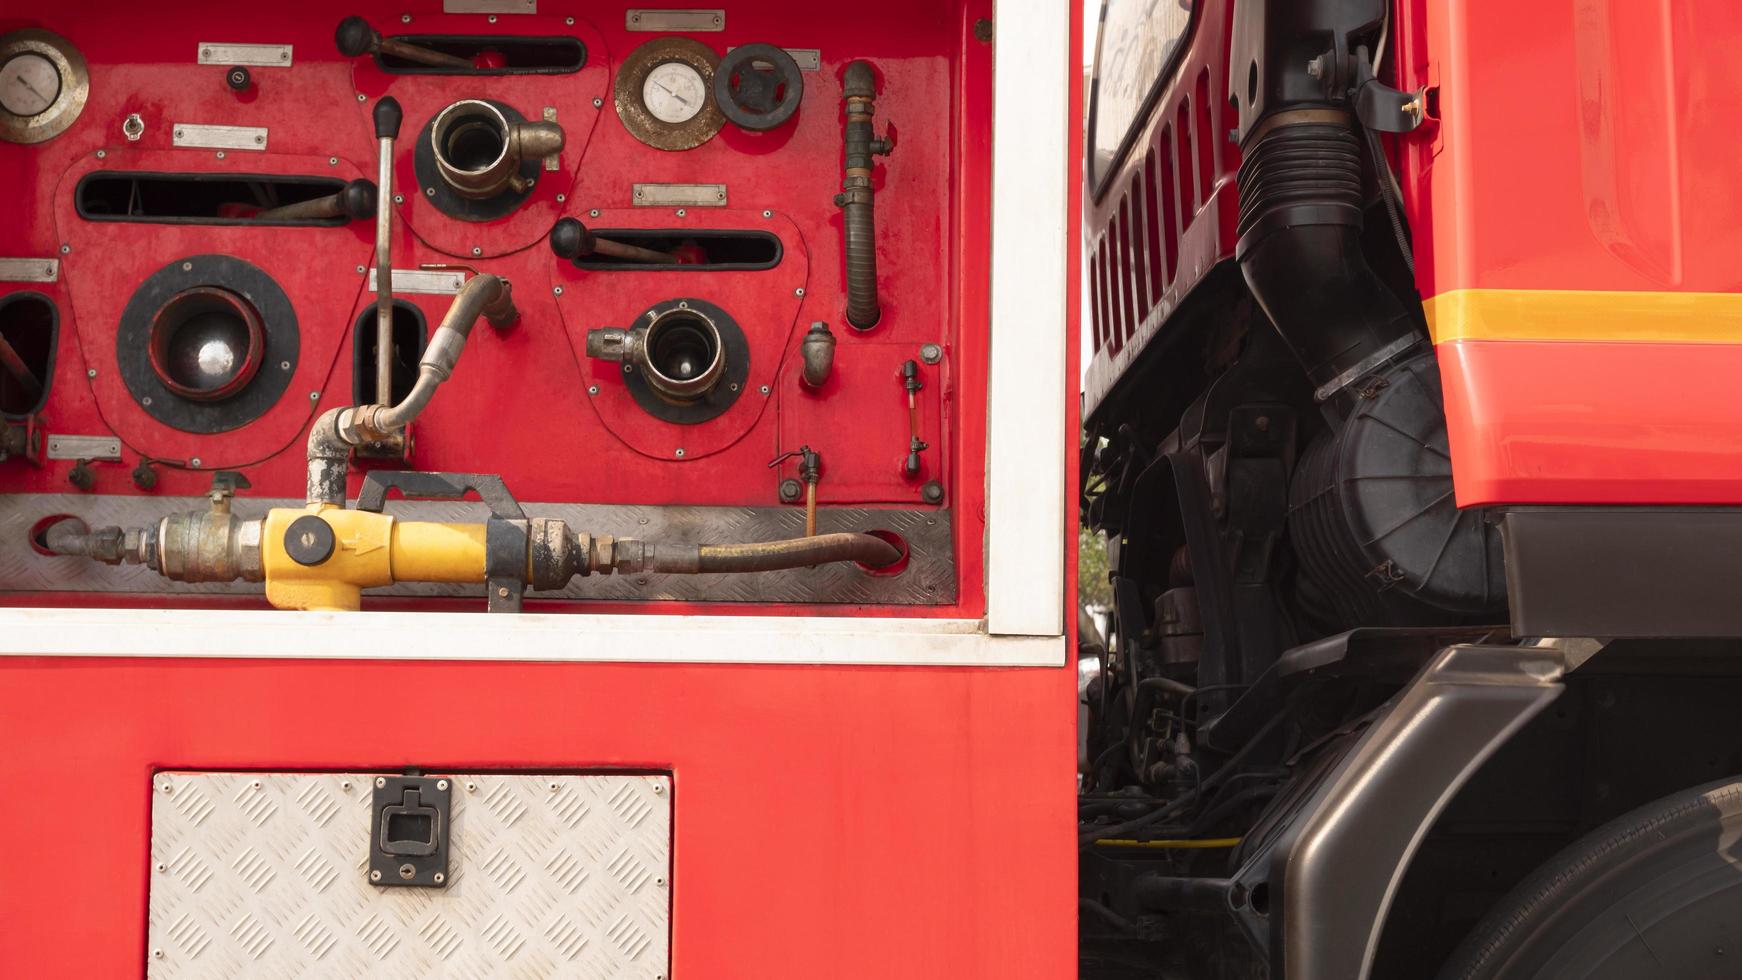 Gauge pressure and valve lever with high pressure fire safety pump on side view of red fire truck photo